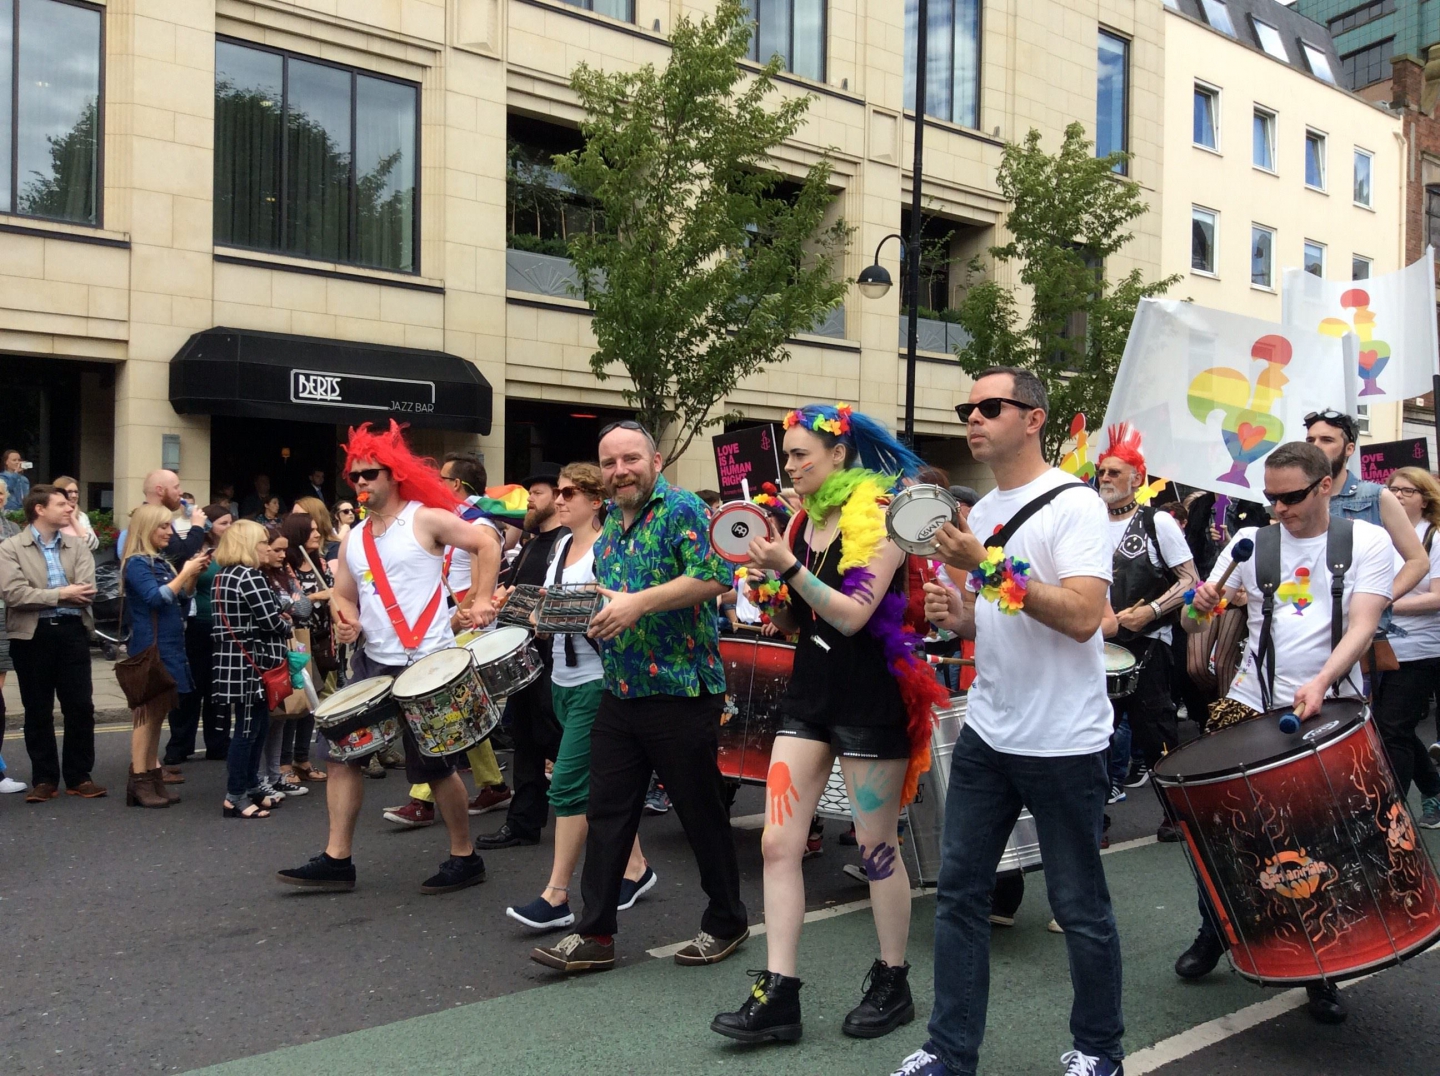 No parade is complete without a bit of samba